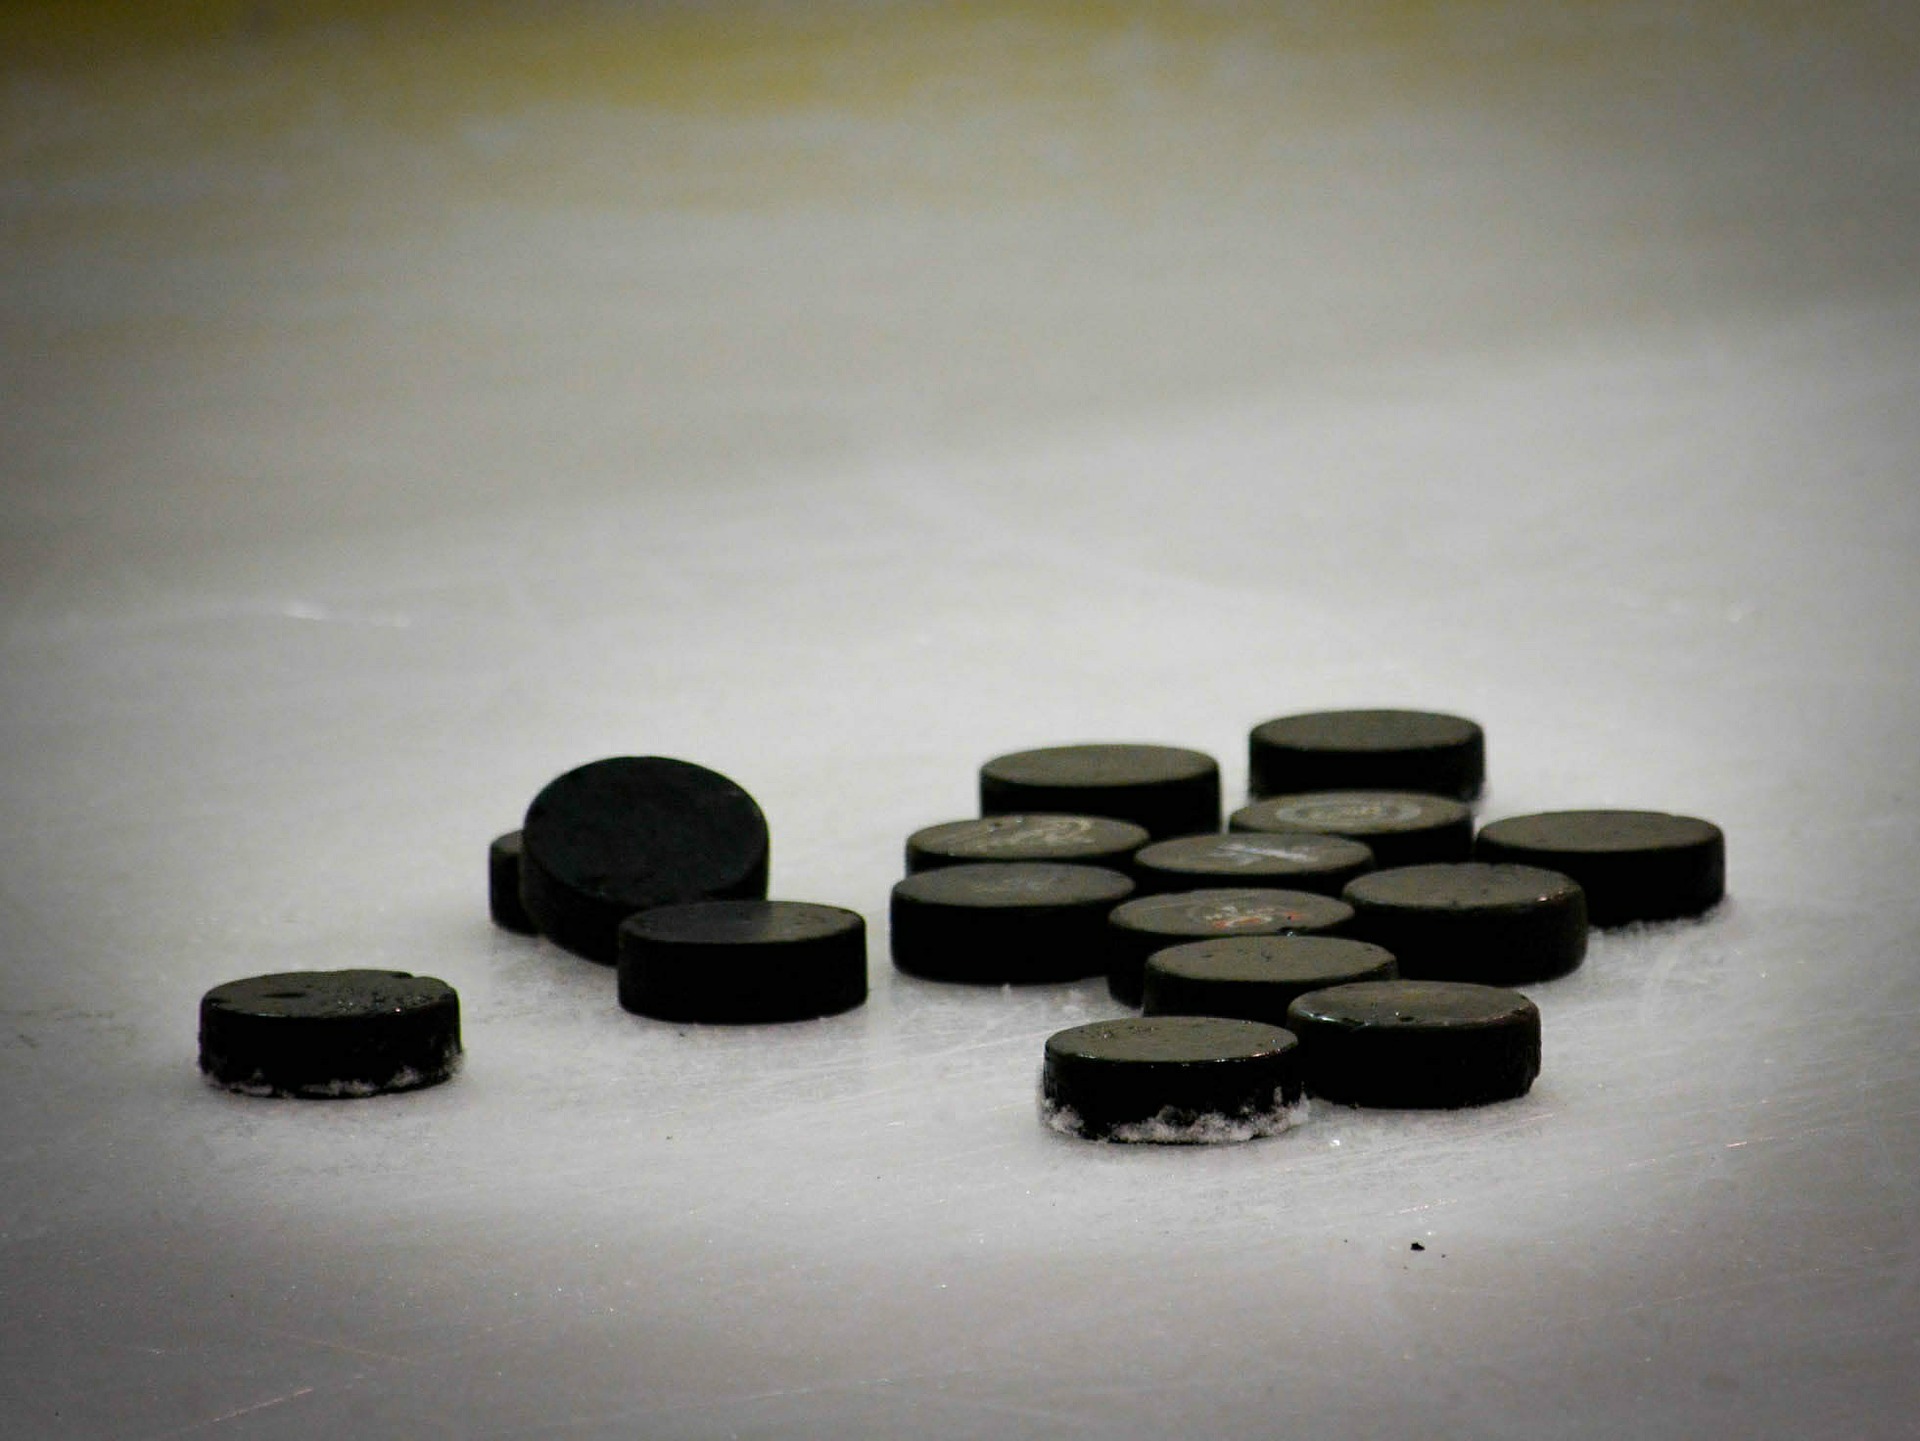 Change announced to Coaching Staff of Cape Breton West Islanders